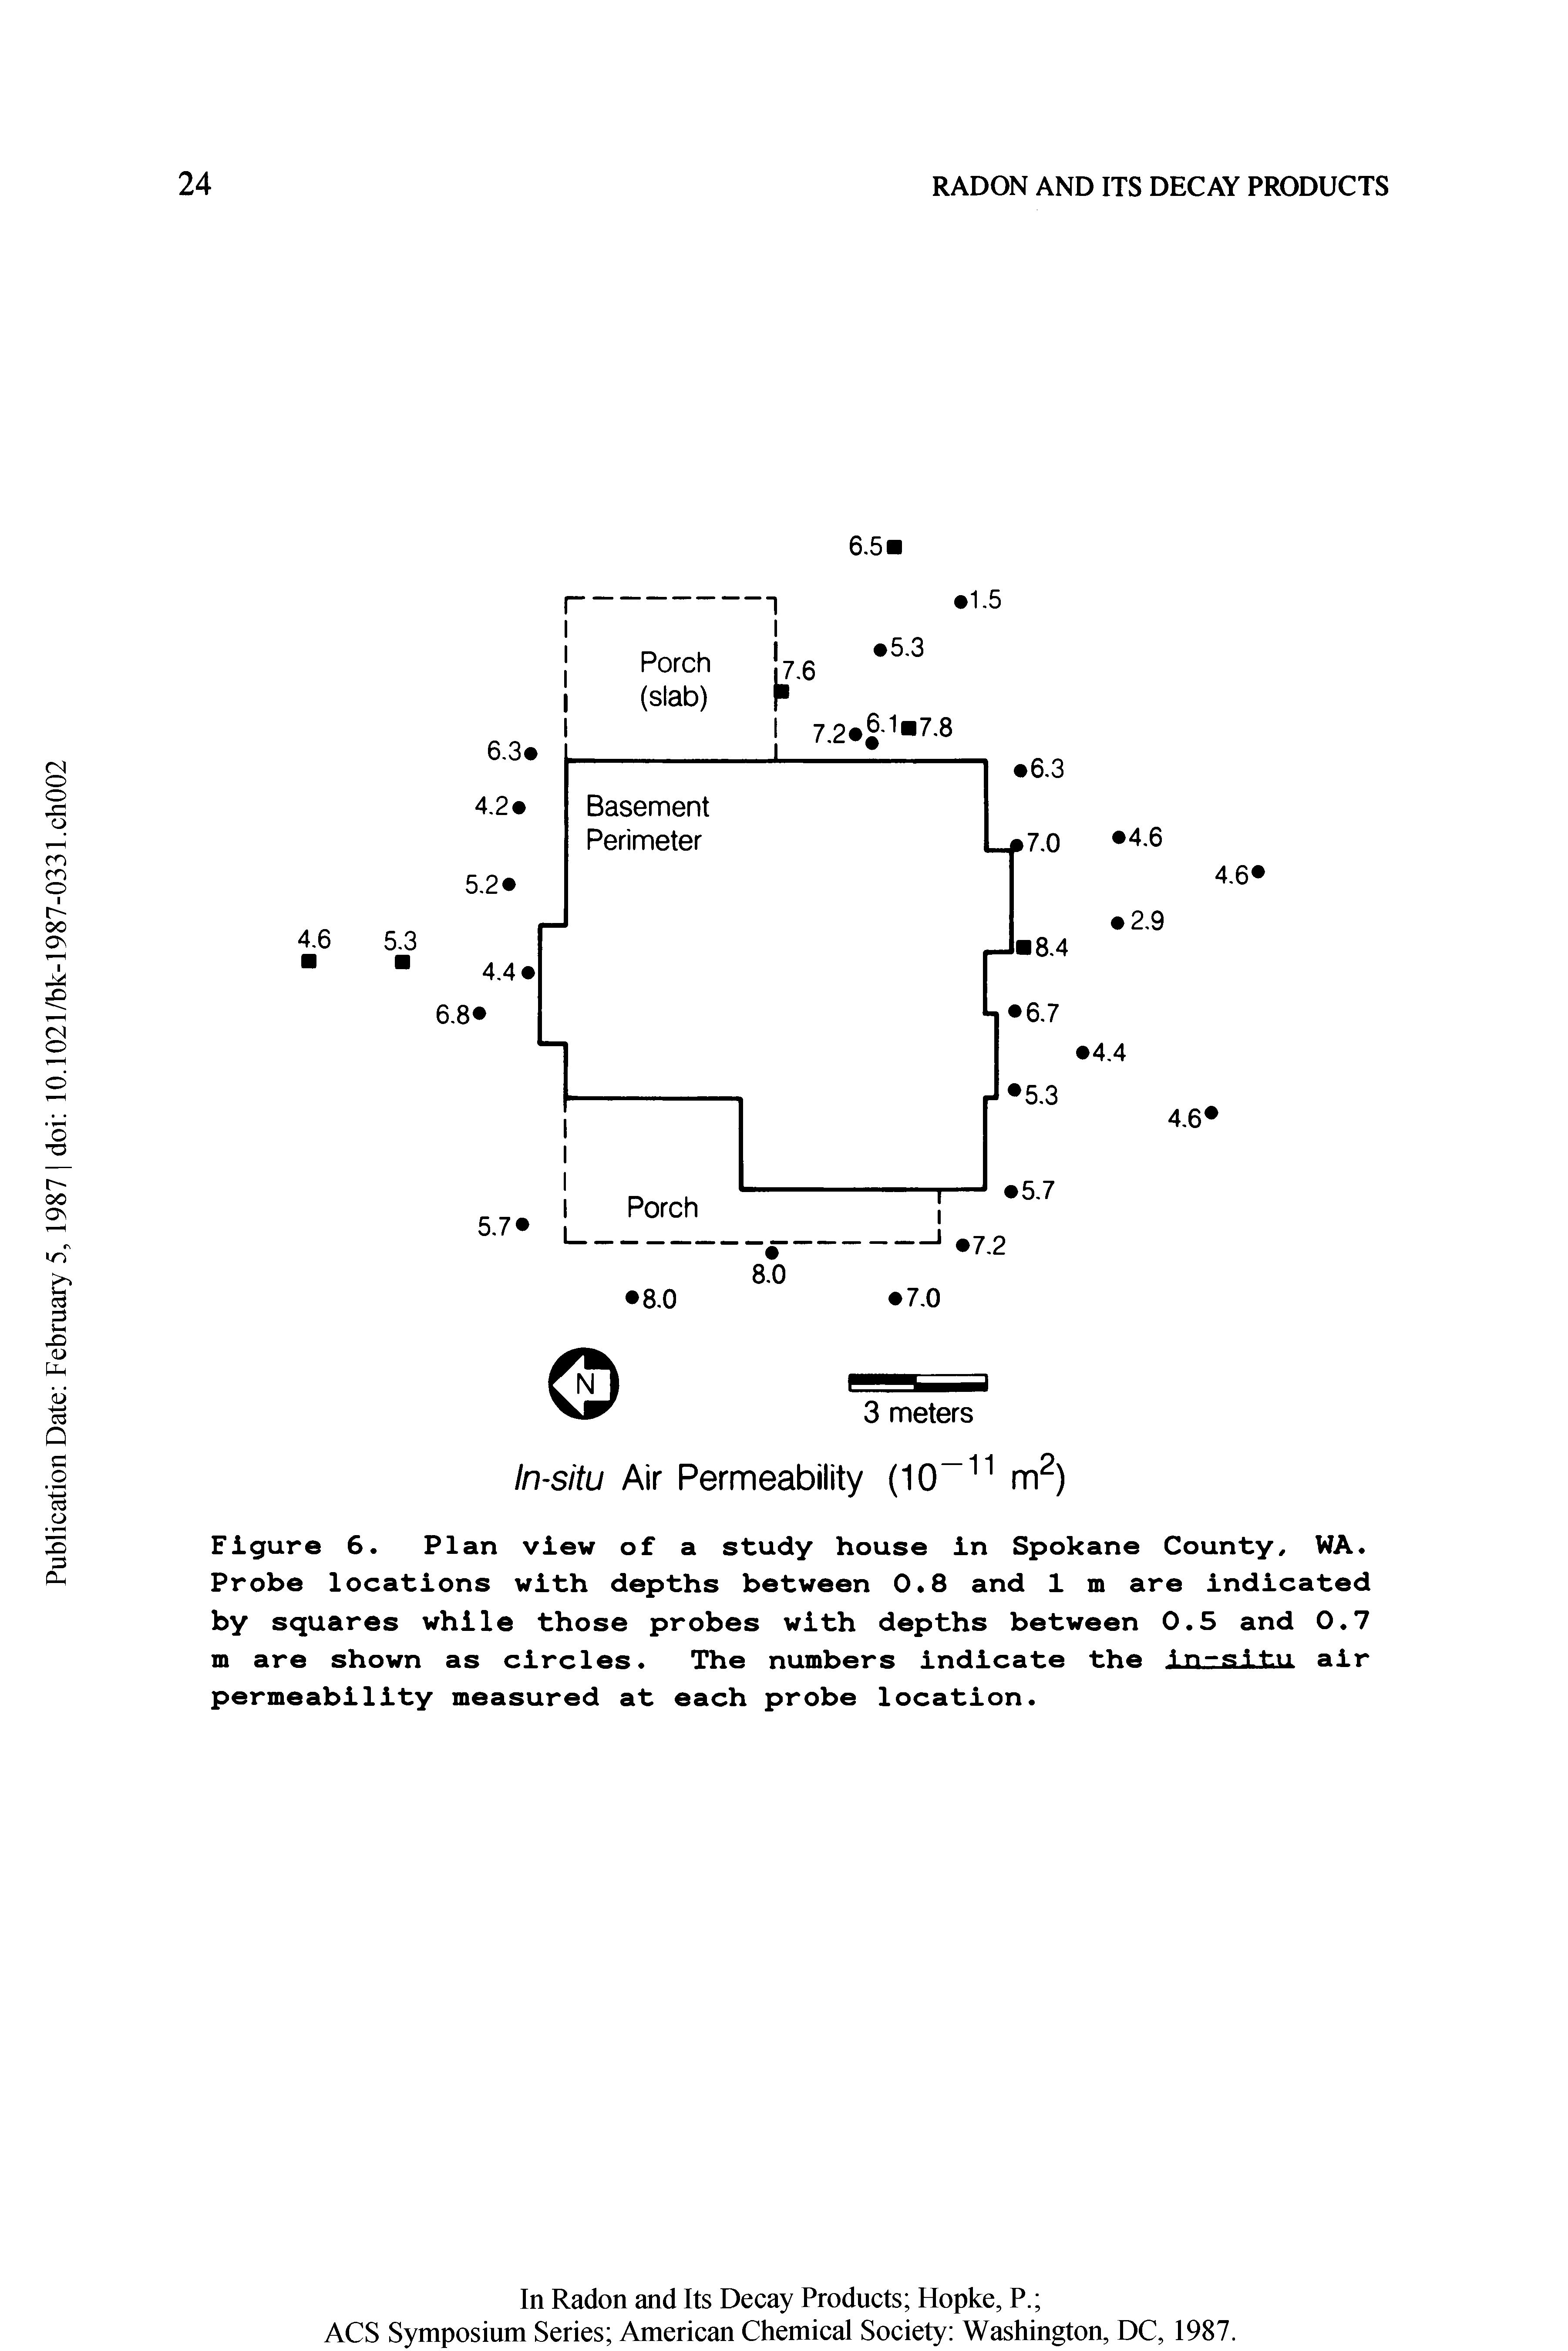 Figure 6. Plan view of a study house in Spokane County, WA. Probe locations with depths between 0.8 and 1 m are indicated by squares while those probes with depths between 0.5 and 0.7 m are shown as circles. The numbers indicate the in-situ air permeability measured at each probe location.